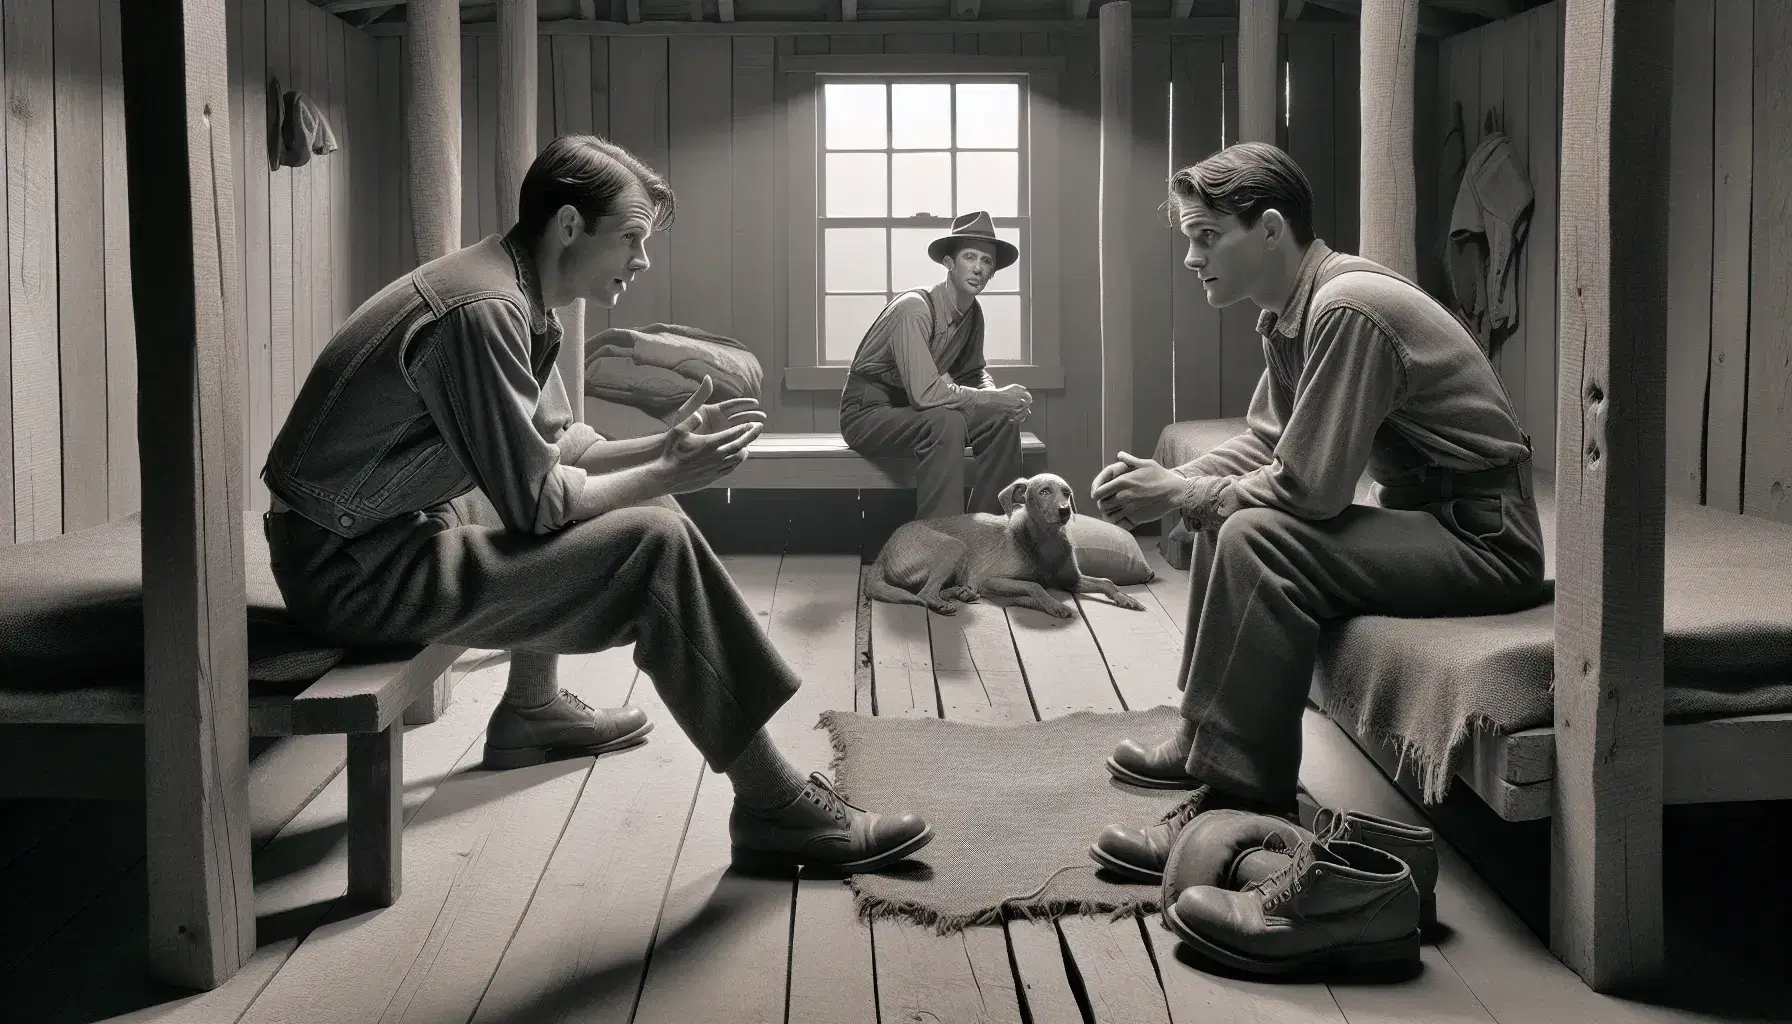 1930s bunkhouse scene with two men conversing on wooden bunks, a third man observing, and a sleeping dog on a frayed blanket, in soft natural light.